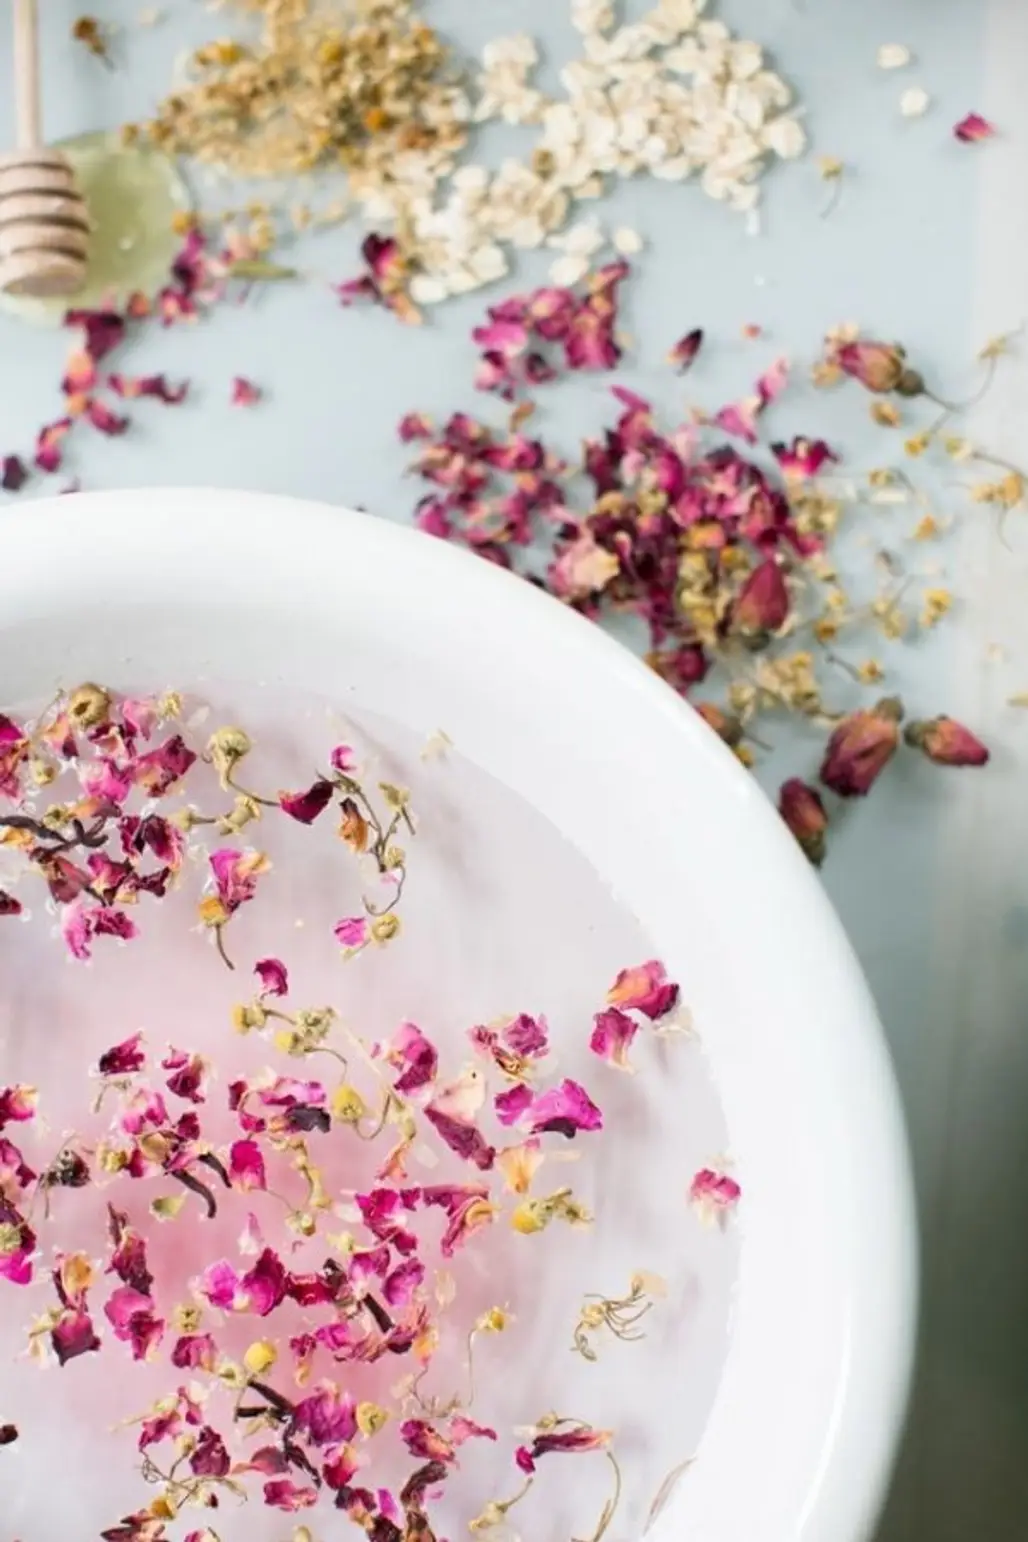 Rose and Chamomile Facial